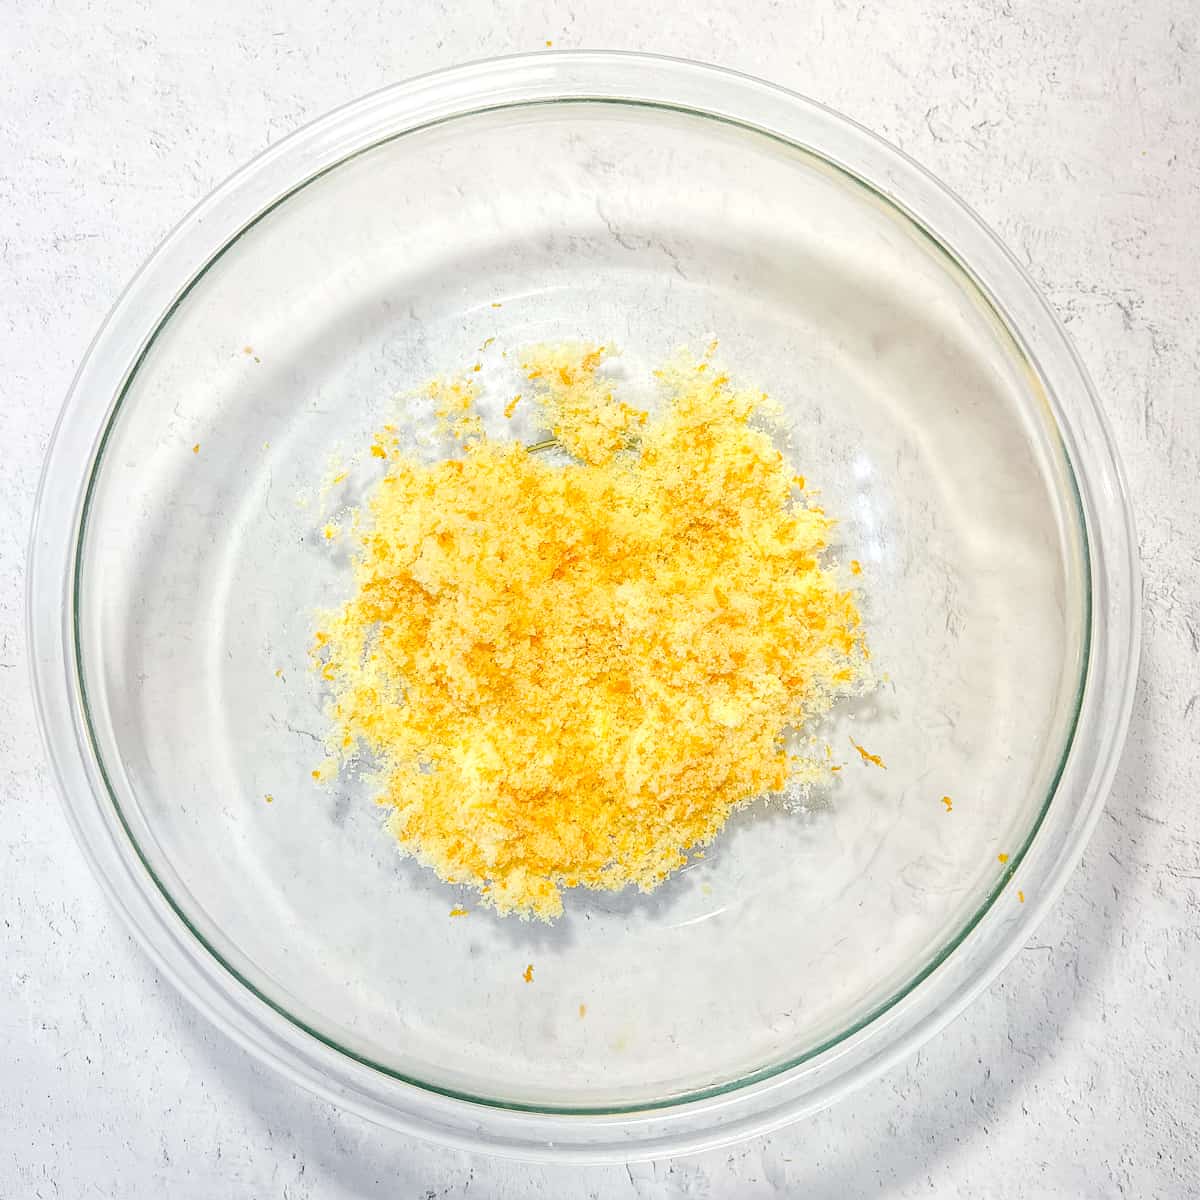 orange zest and sugar in a glass bowl.